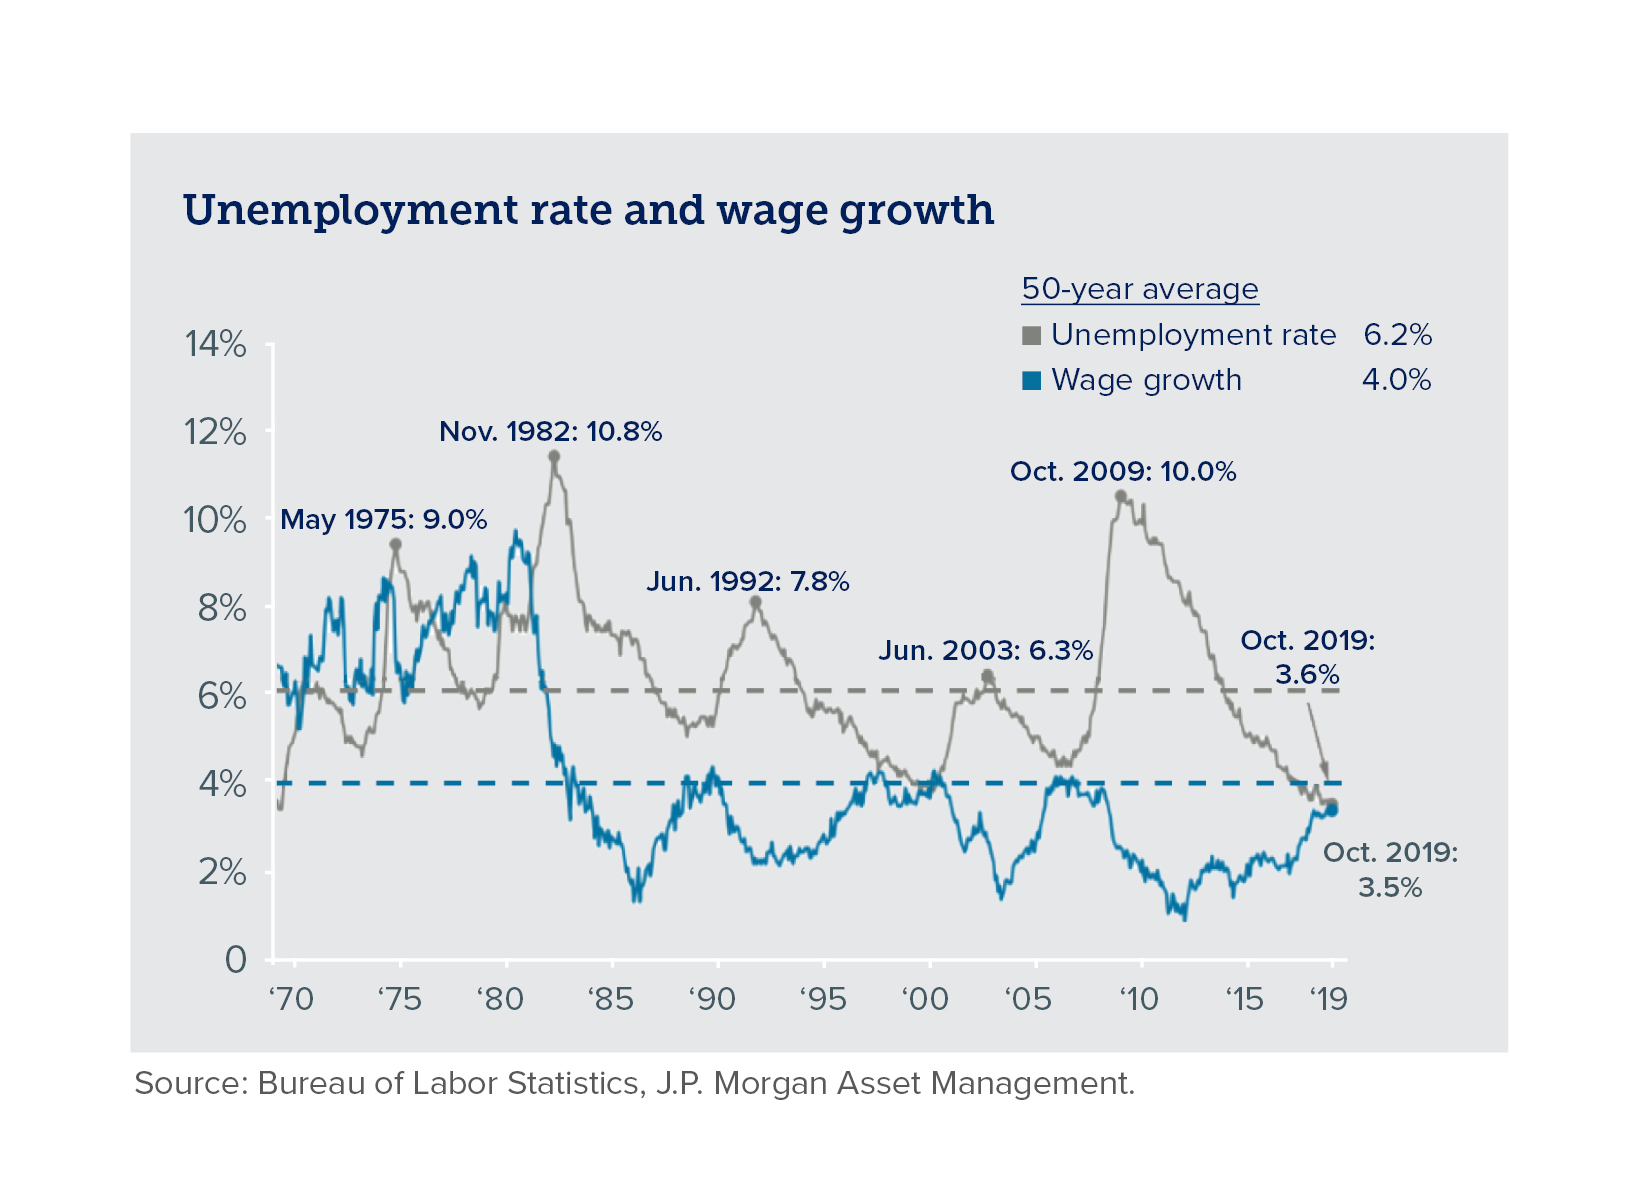 Chart of unemployment rate and wage growth over time